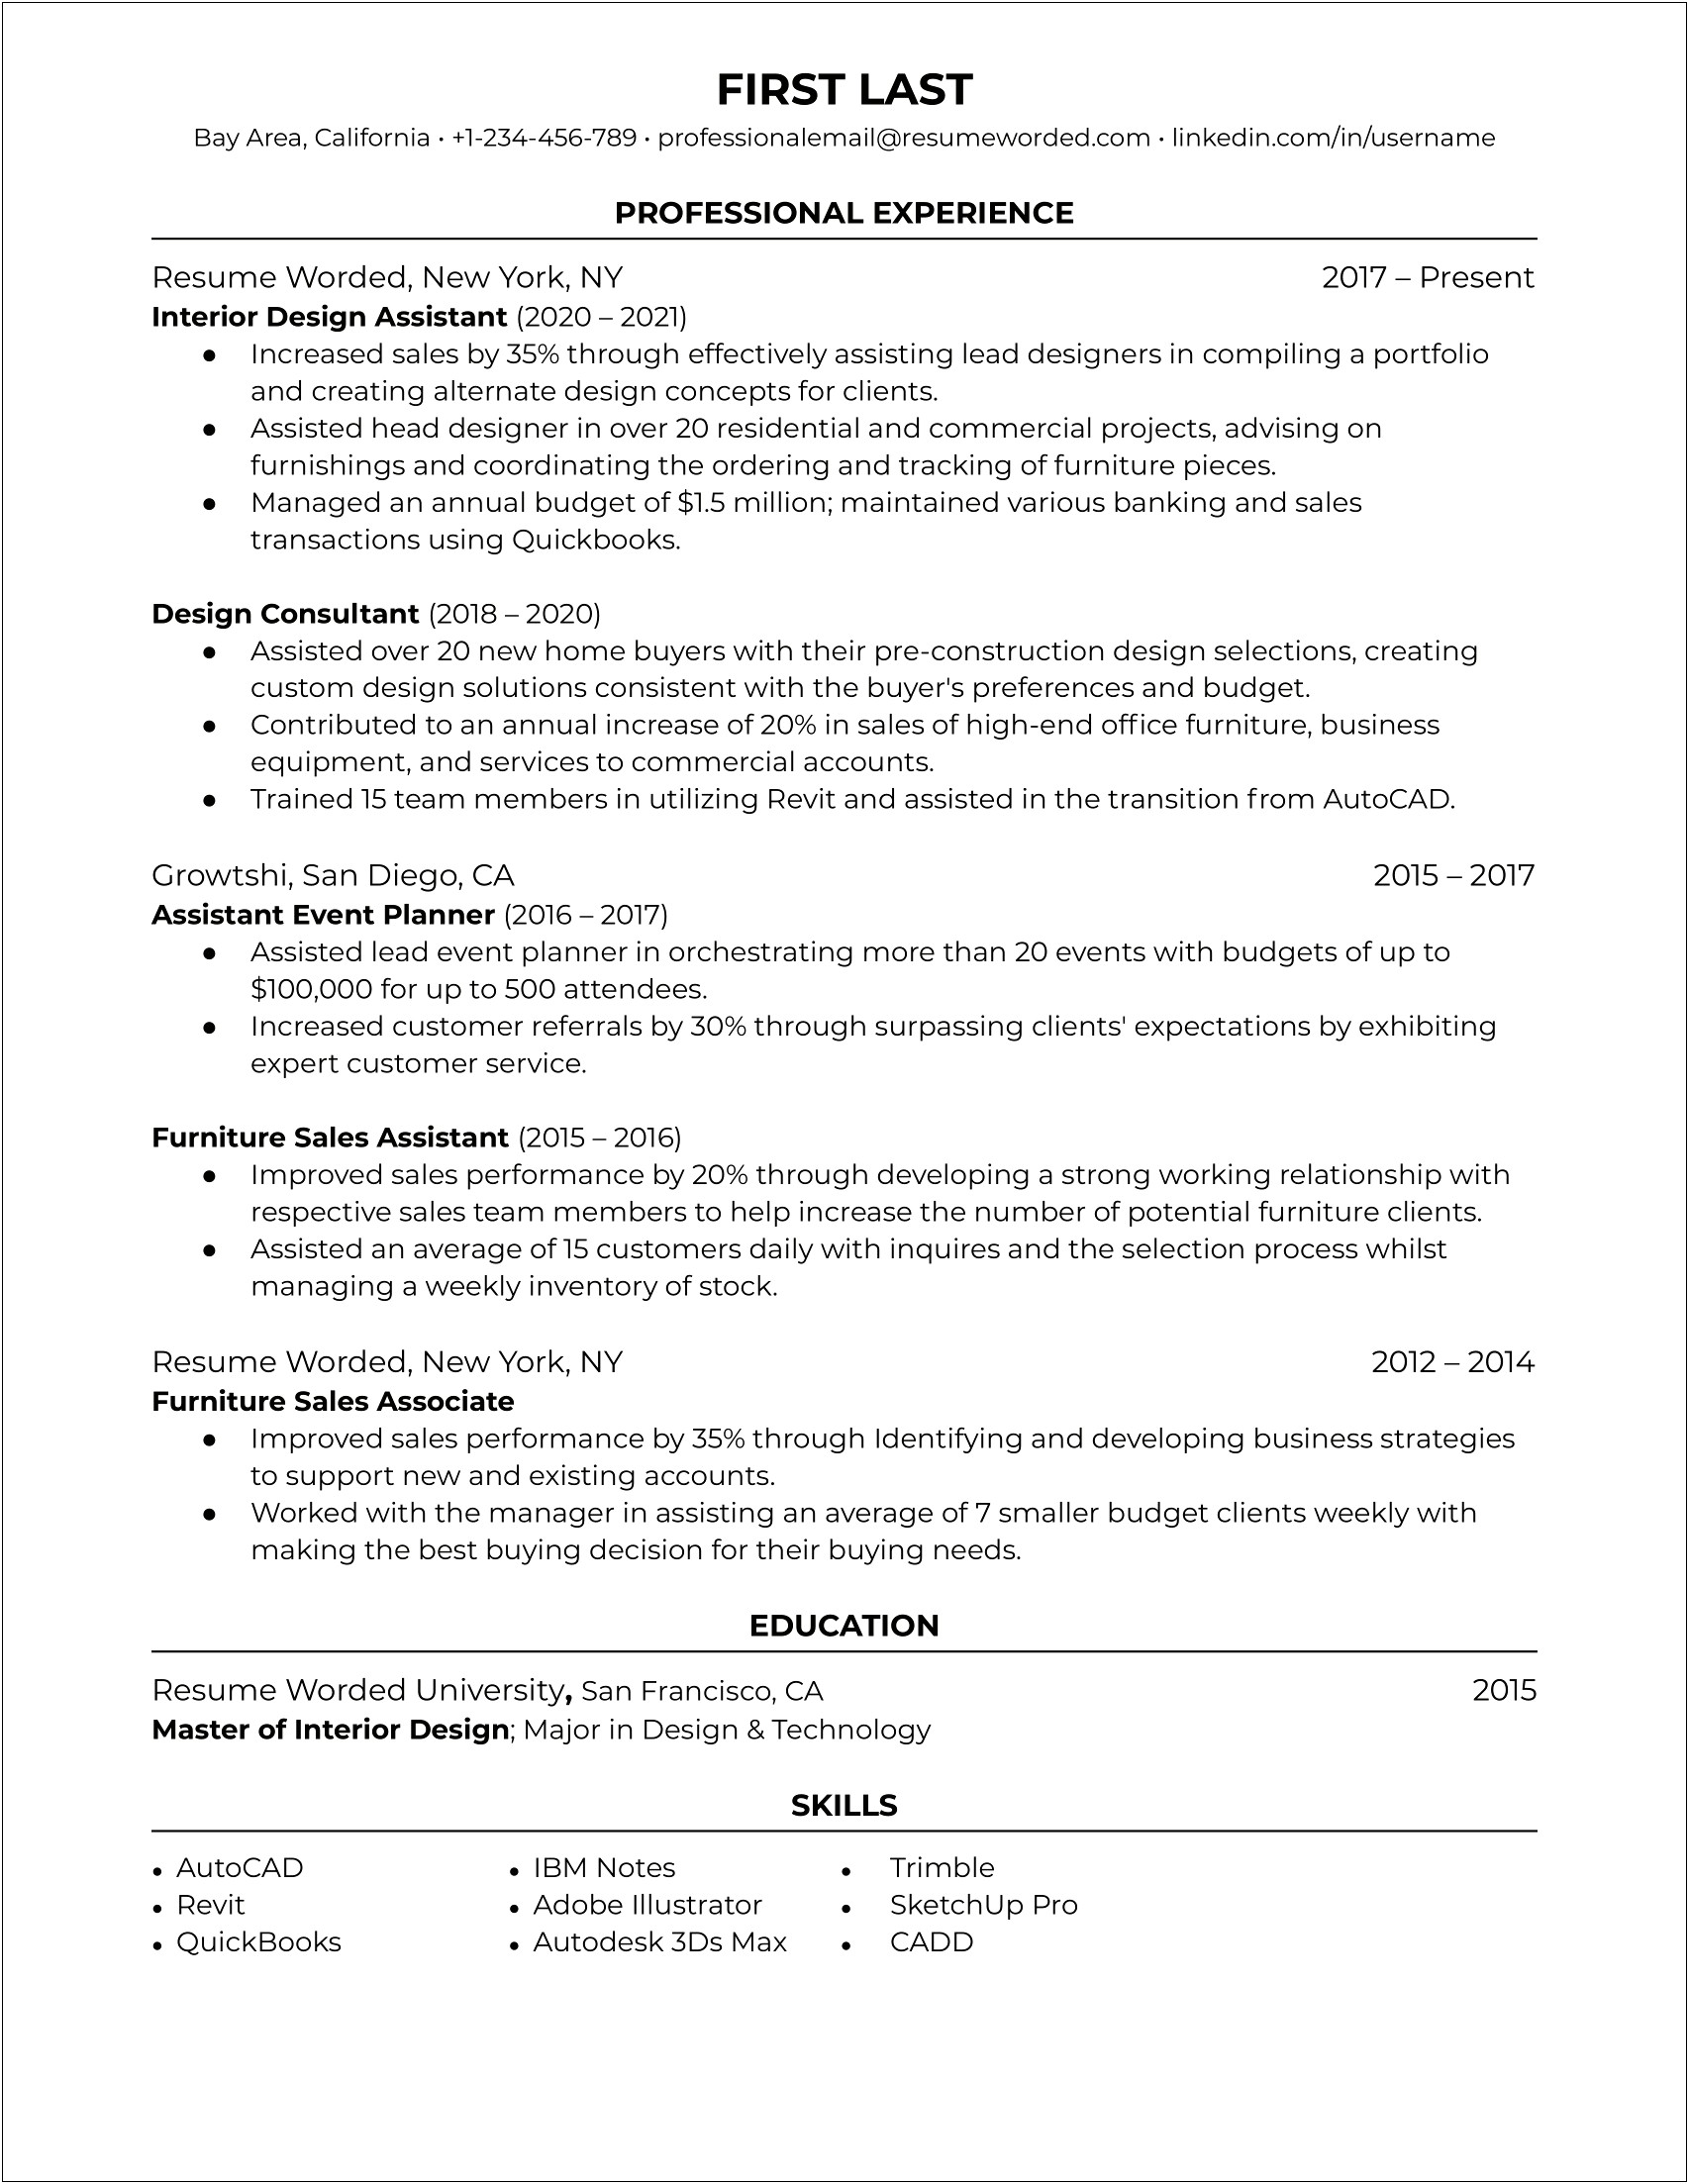 Resume Format For Project Manager In Interior Design